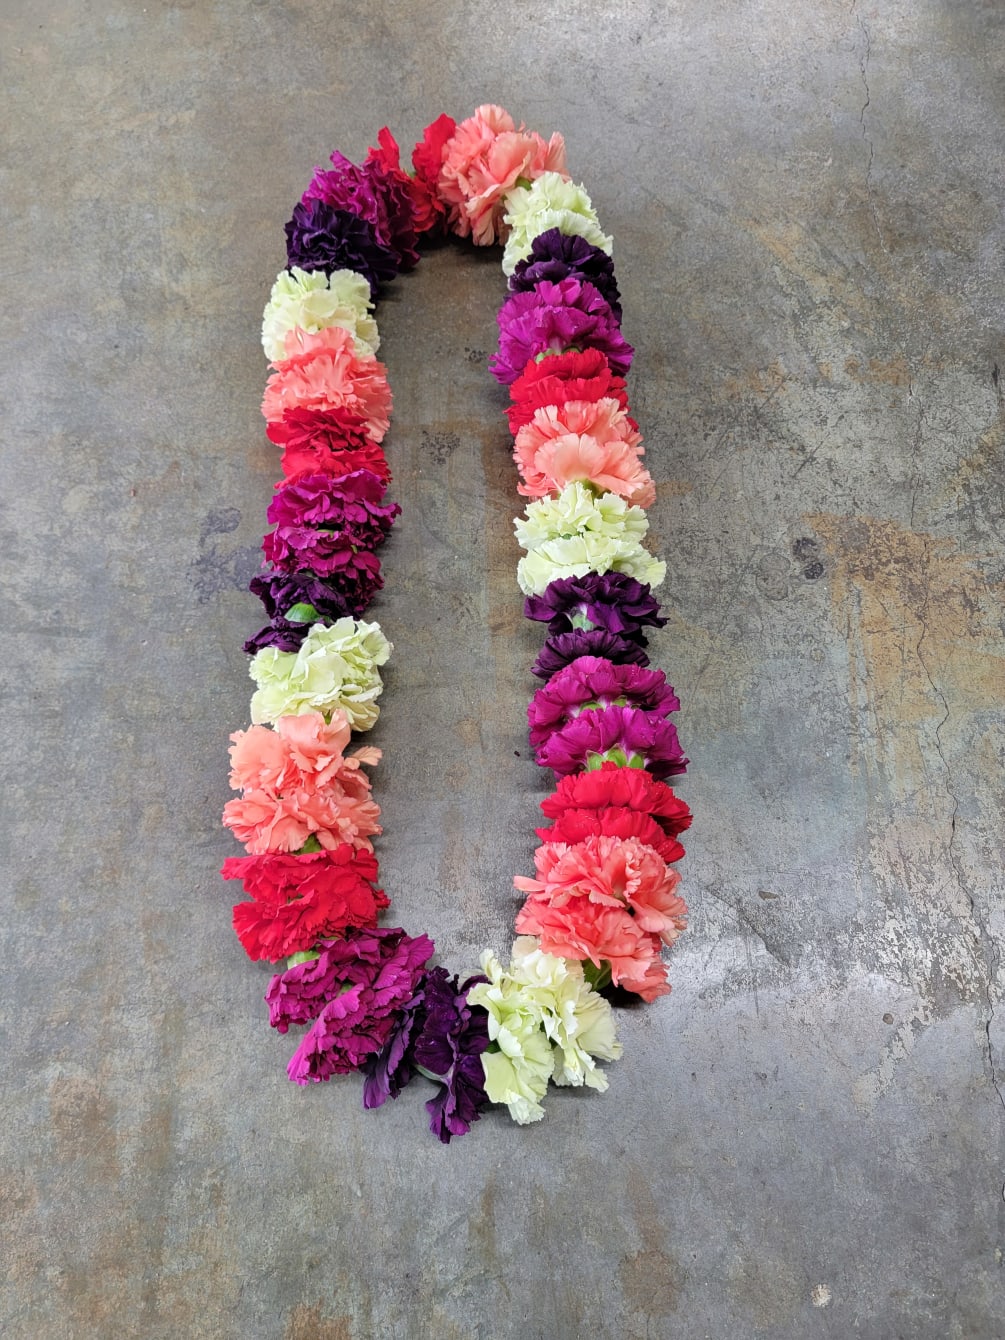 A colorful celebratory lei for graduations, birthday parties or any other event